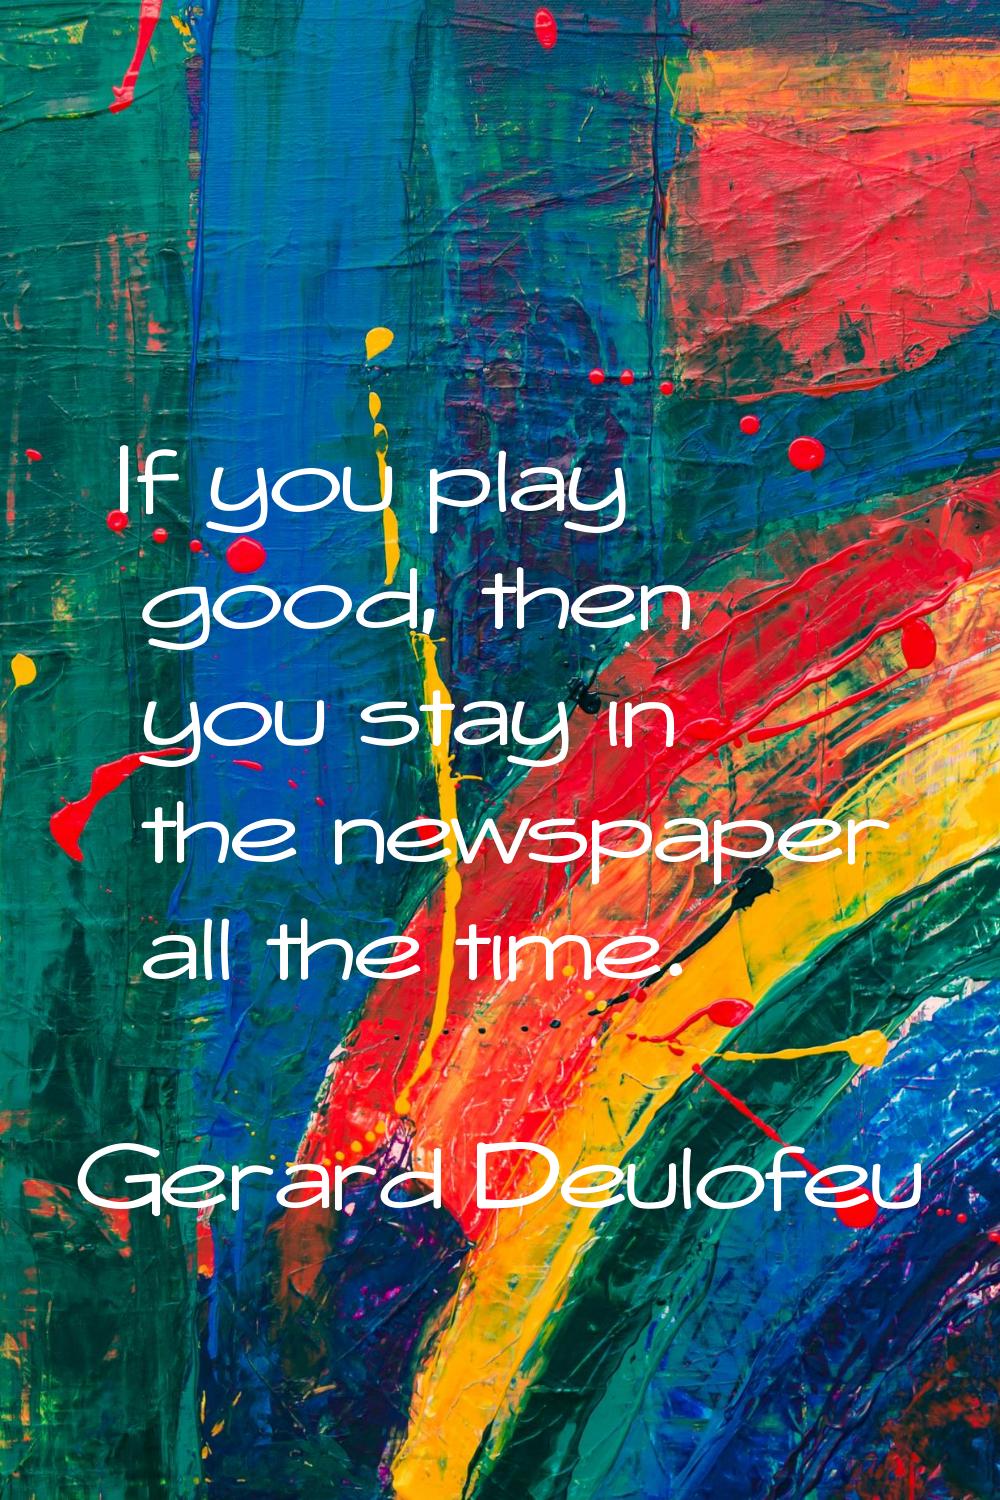 If you play good, then you stay in the newspaper all the time.